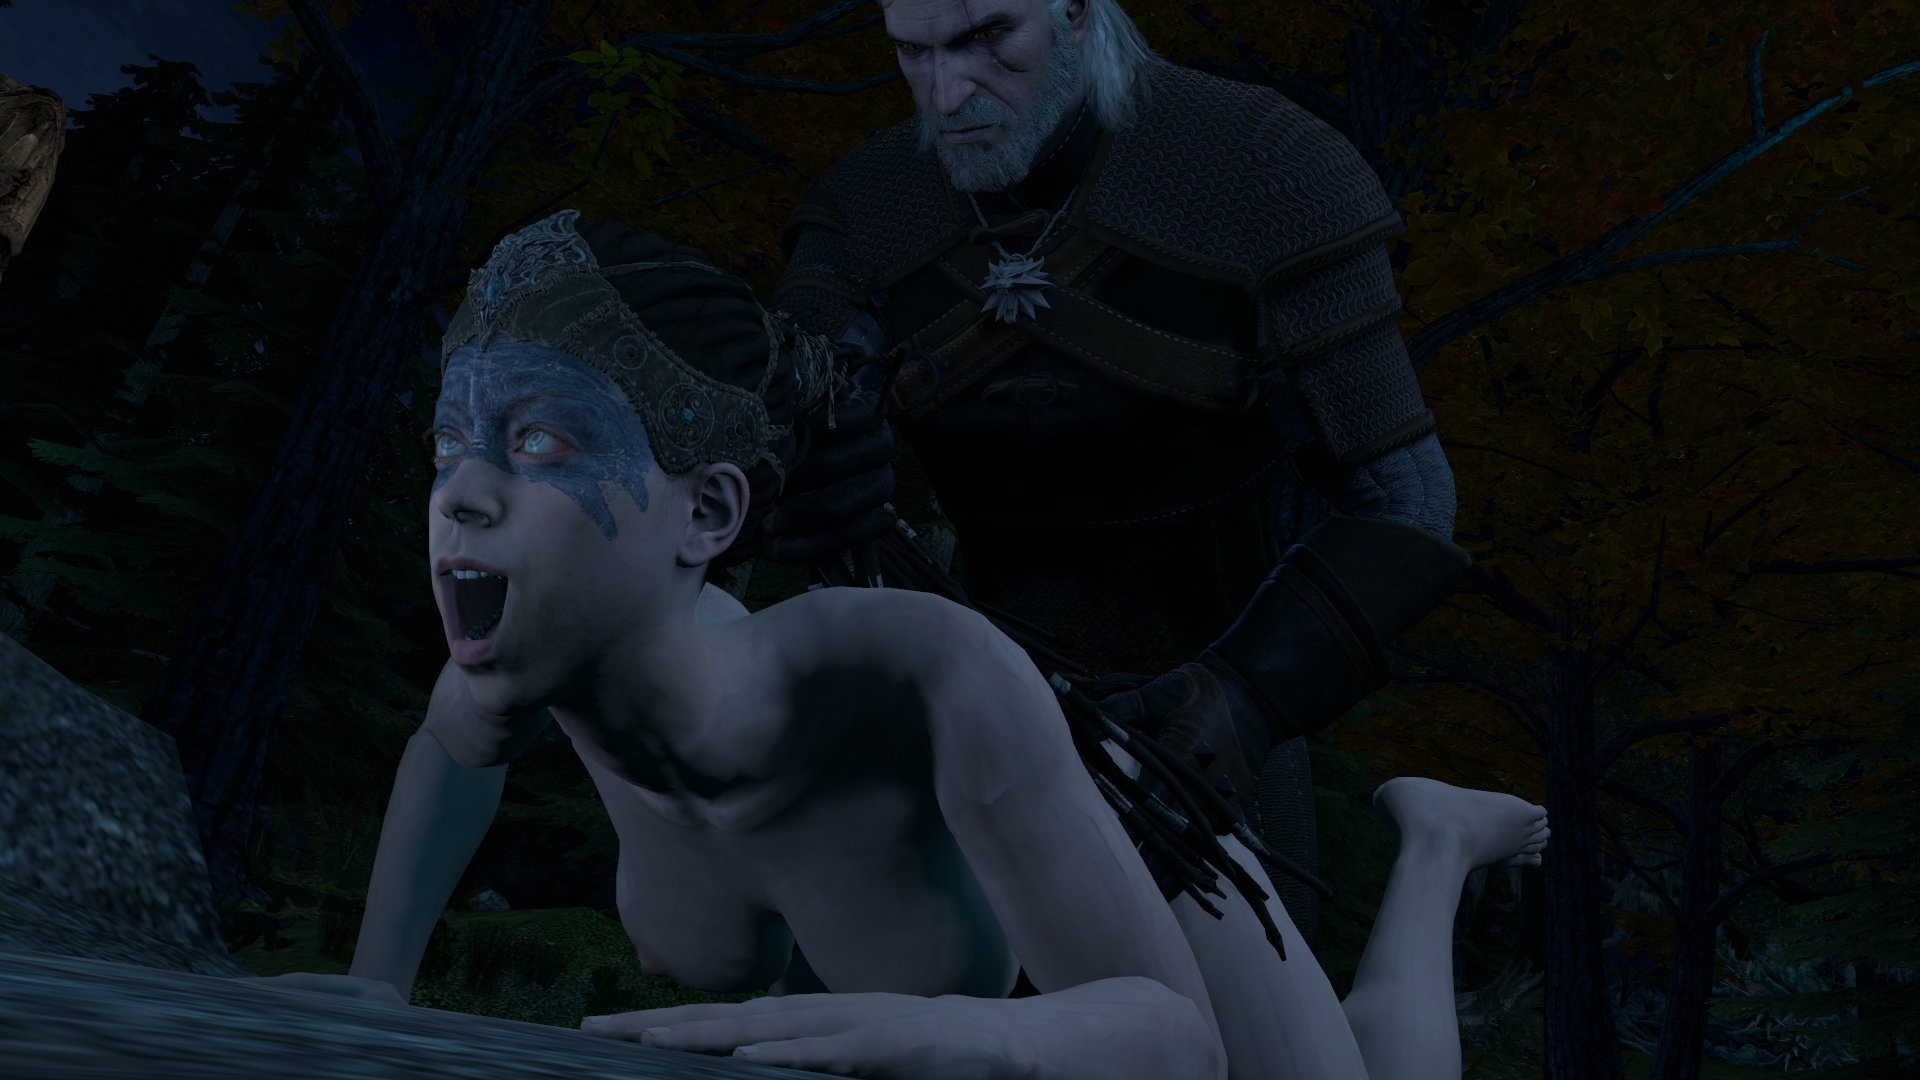 The Witcher/Hellblade Crossover: Geralt plows Senua Senua Geralt of rivia The Witcher Anal Anal Penetration Boobs Big boobs Tits Ass Big Ass Cake Sexy Horny Face Horny 3d Porn 3